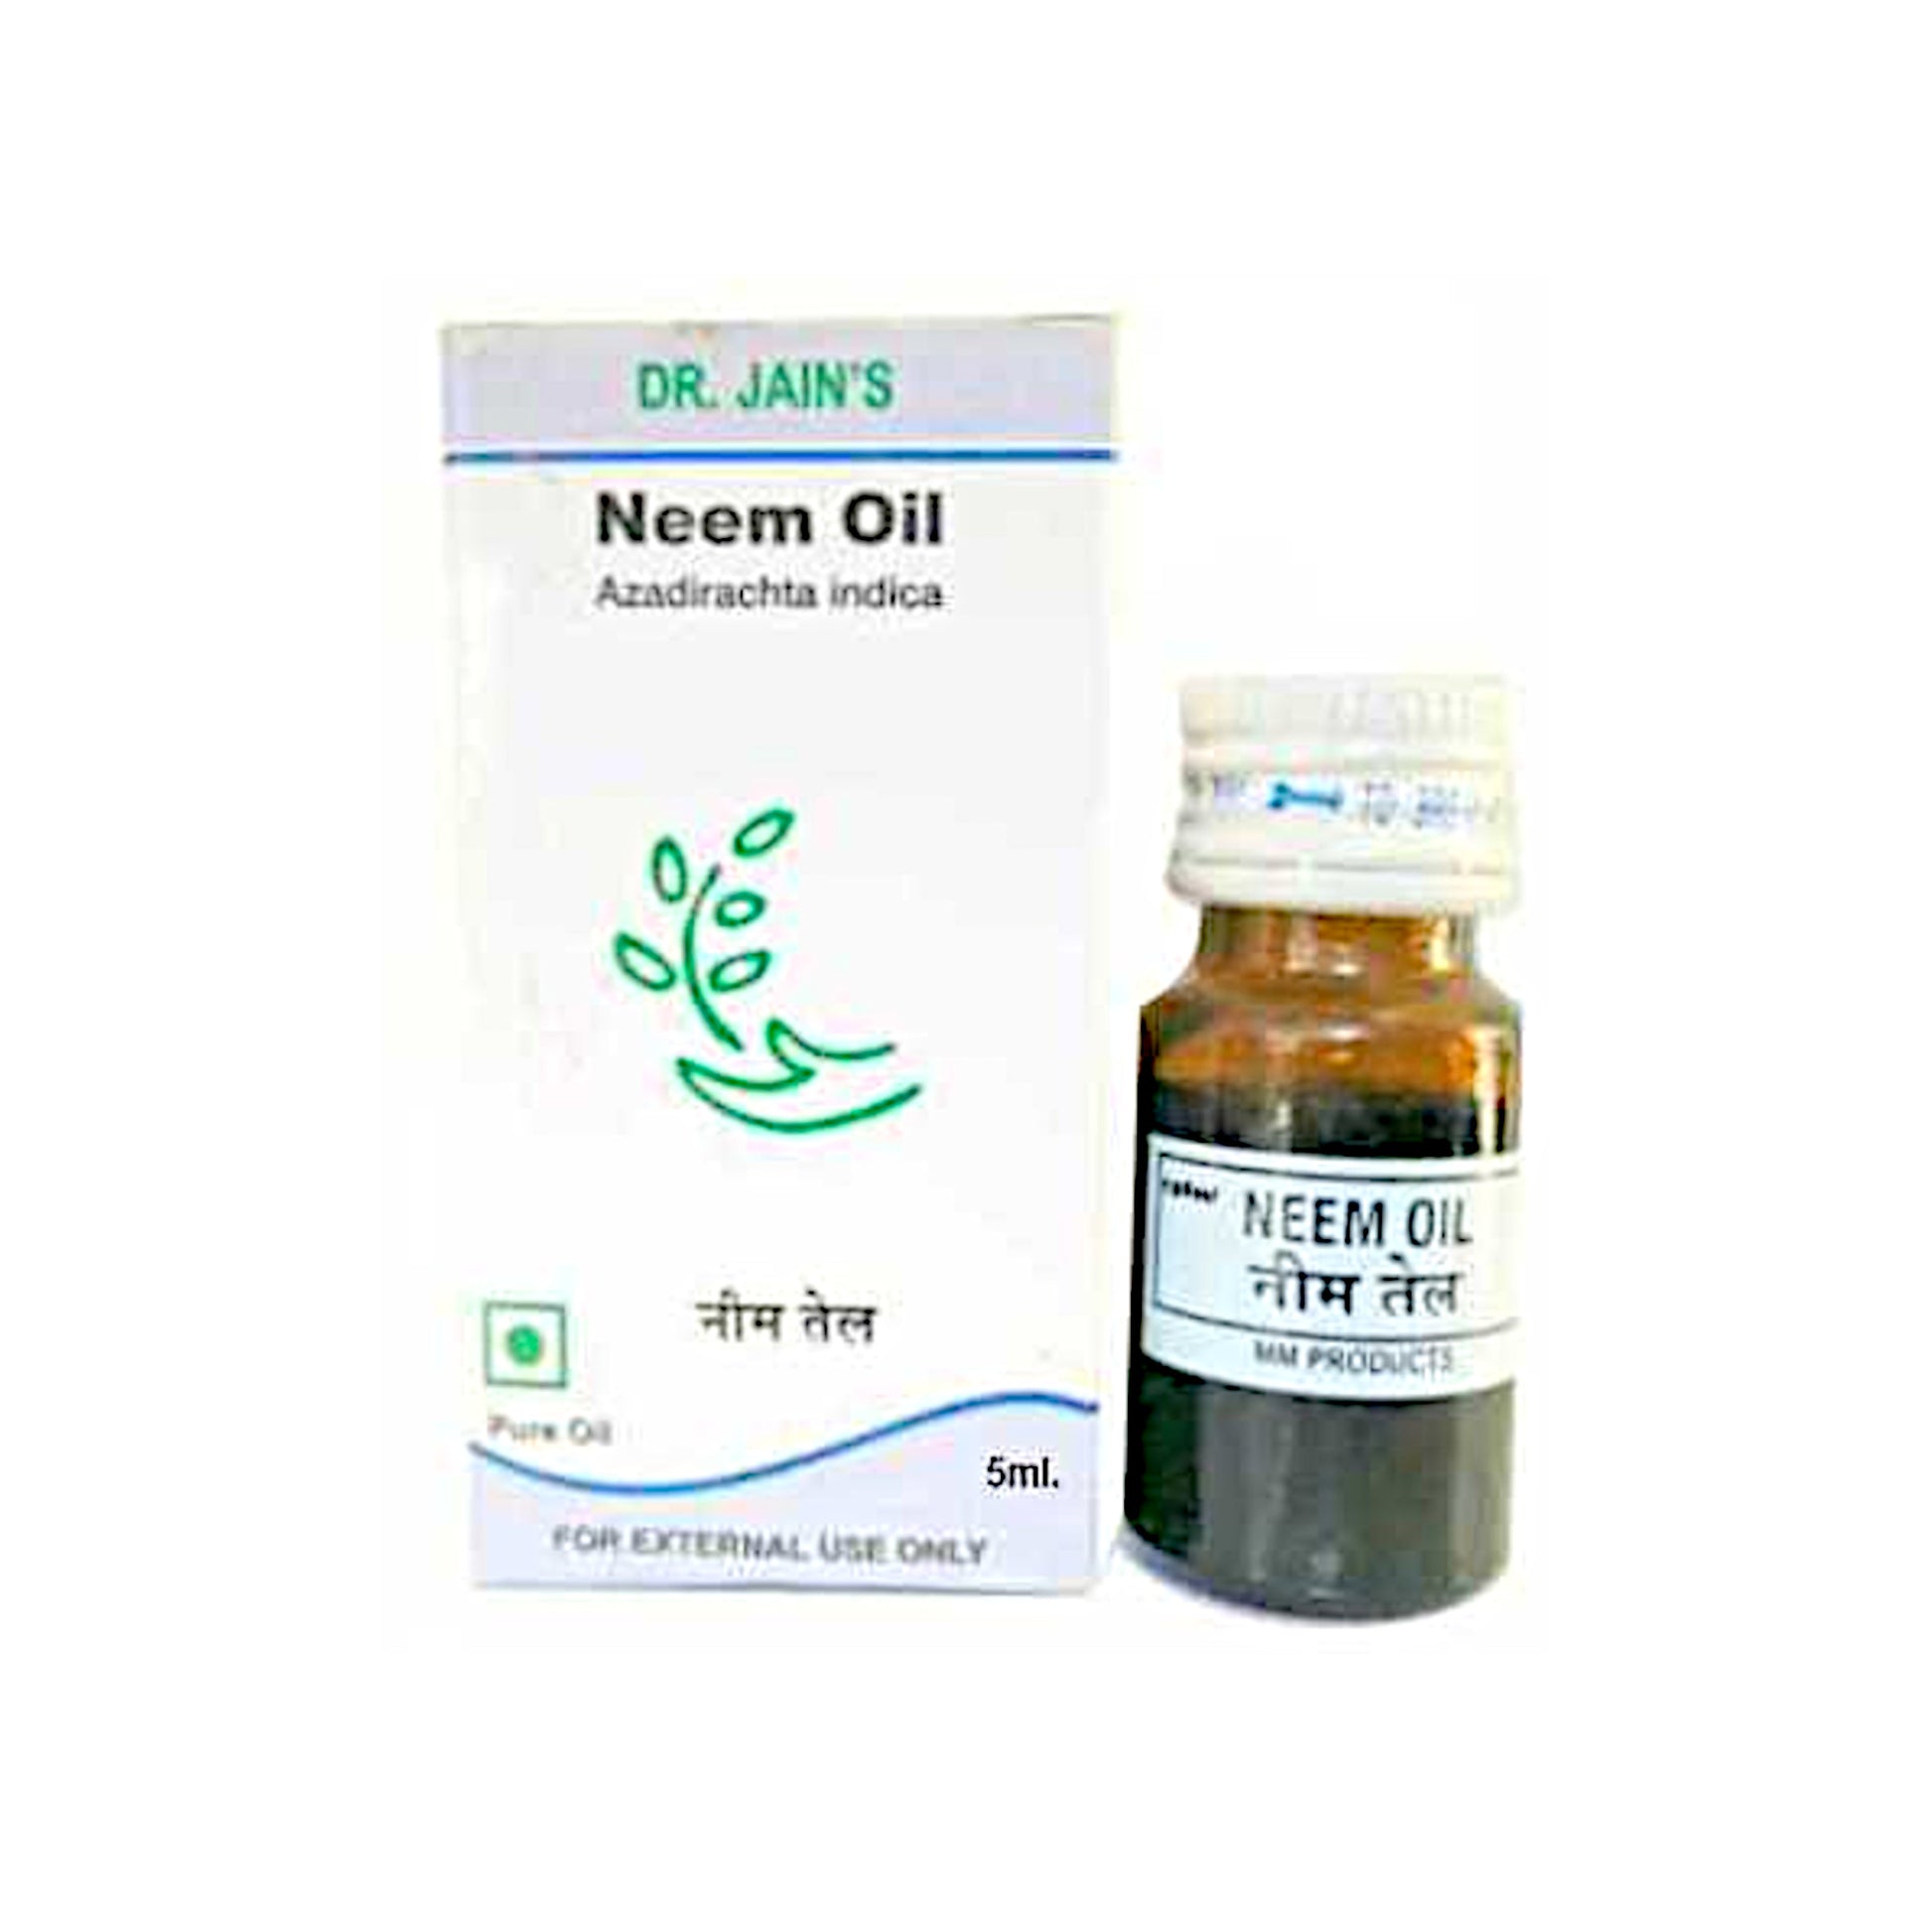 Image for Dr. Jain's Neem Oil - 10 ml. Offers various skin and hair benefits, including treating acne, dandruff, and skin infections.